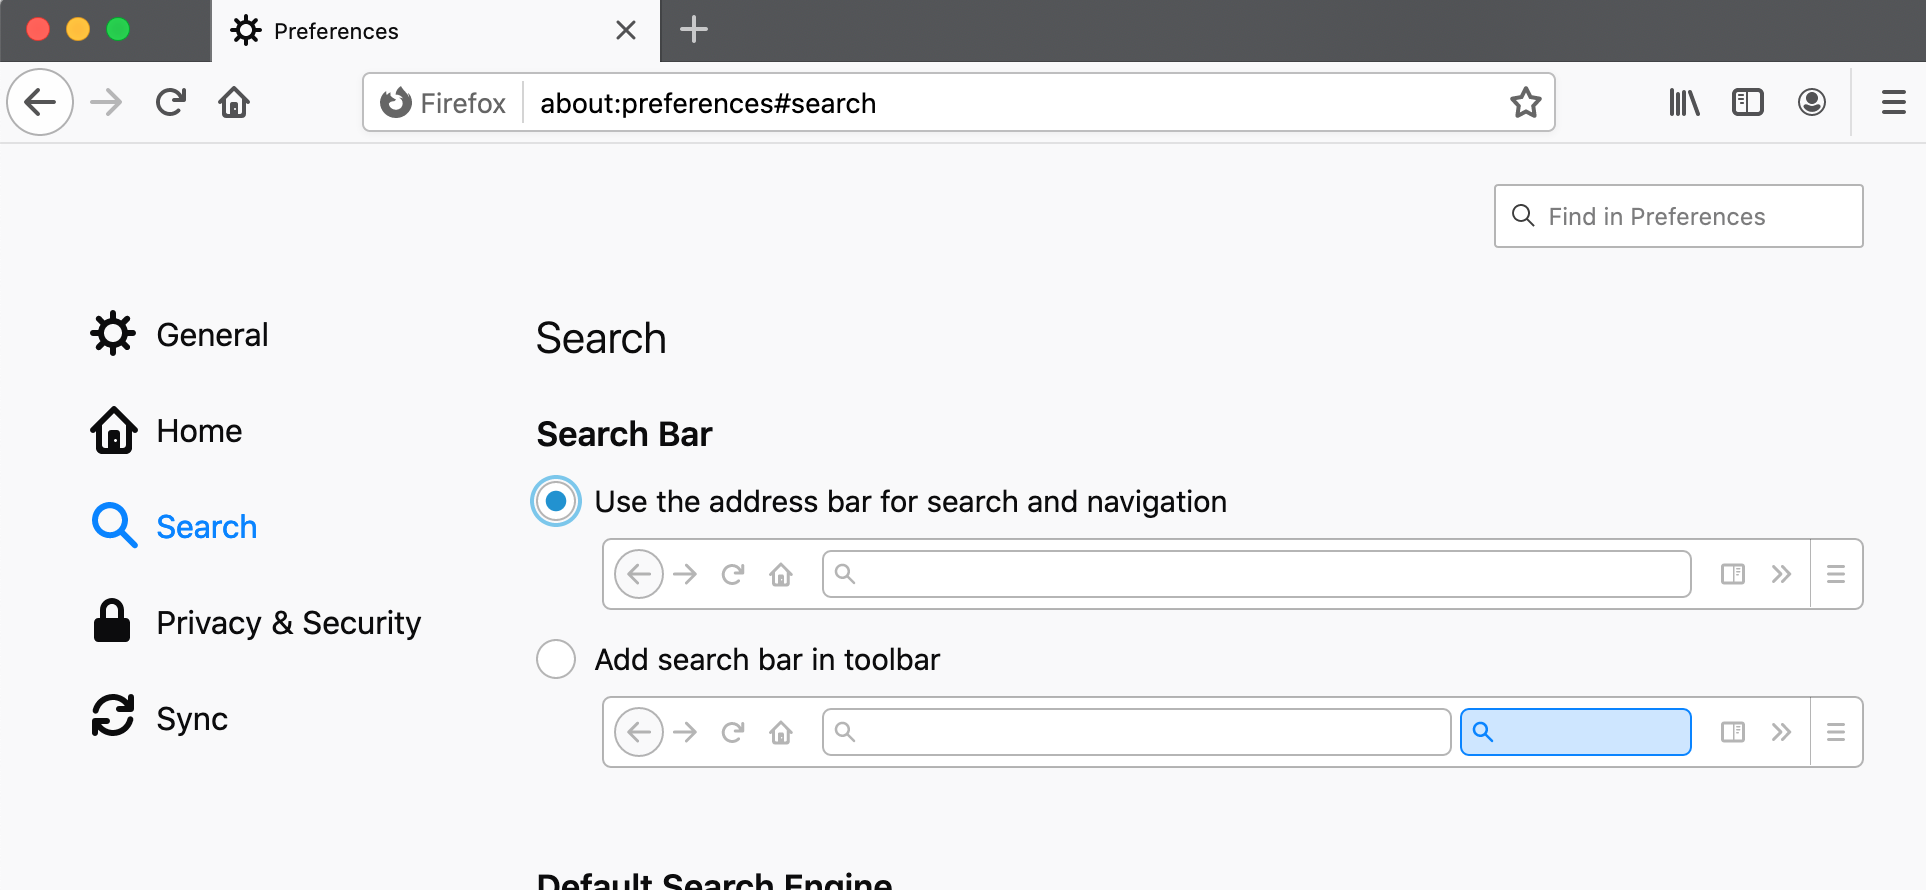 opensearch firefox preferences search